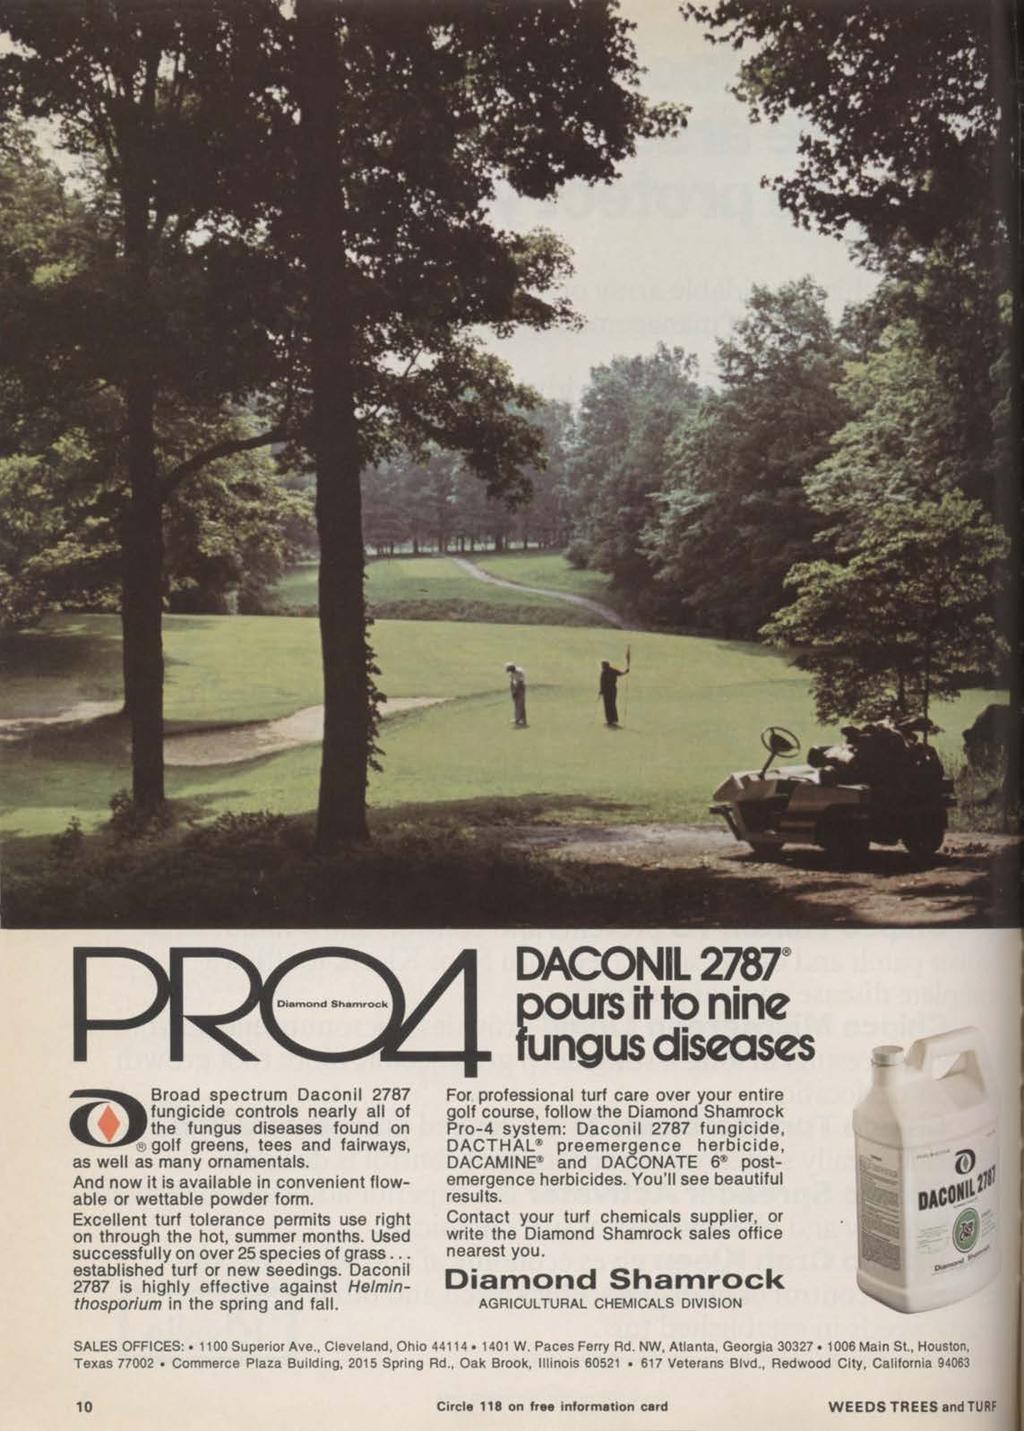 Broad spectrum Daconil 2787 fungicide controls nearly all of the fungus diseases found on golf greens, tees and fairways, as well as many ornamentals.